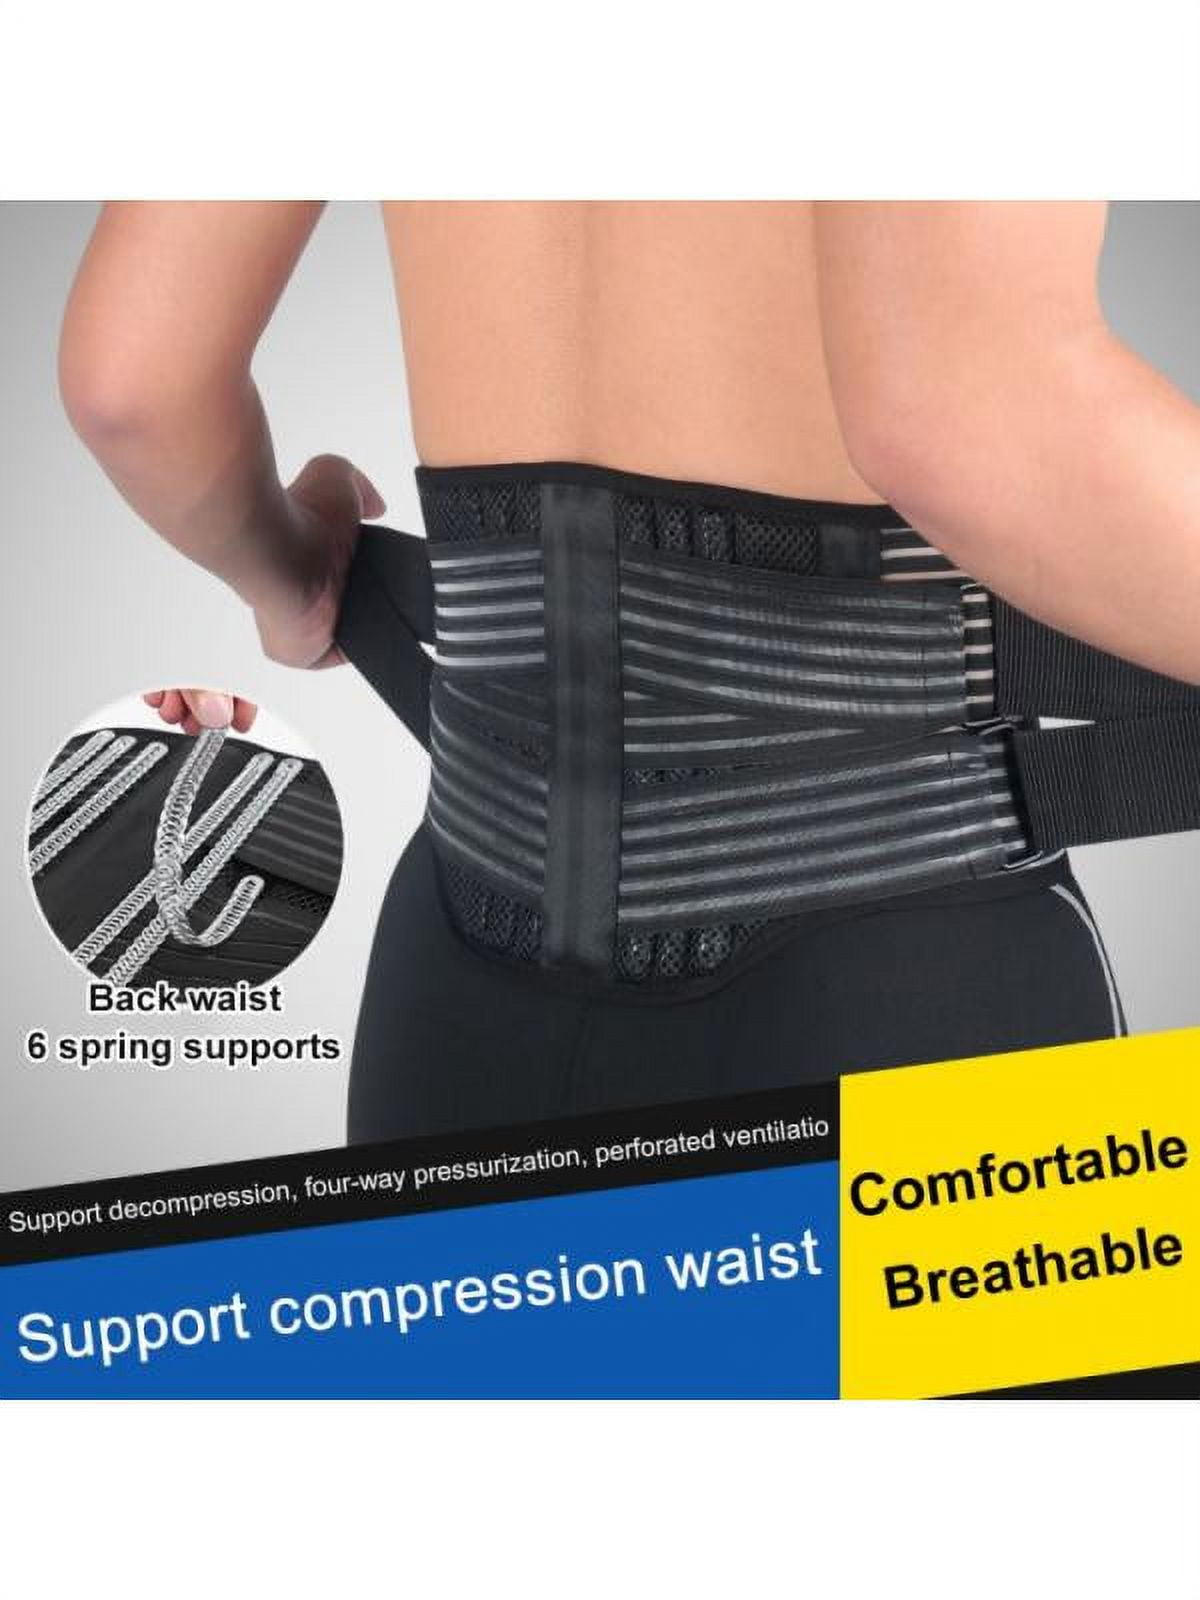 Lumbar Support Belt with Adjustable Pulley Compression System | Sciatica, Spinal Stenosis | PDAC L0626 / L0641 3XL